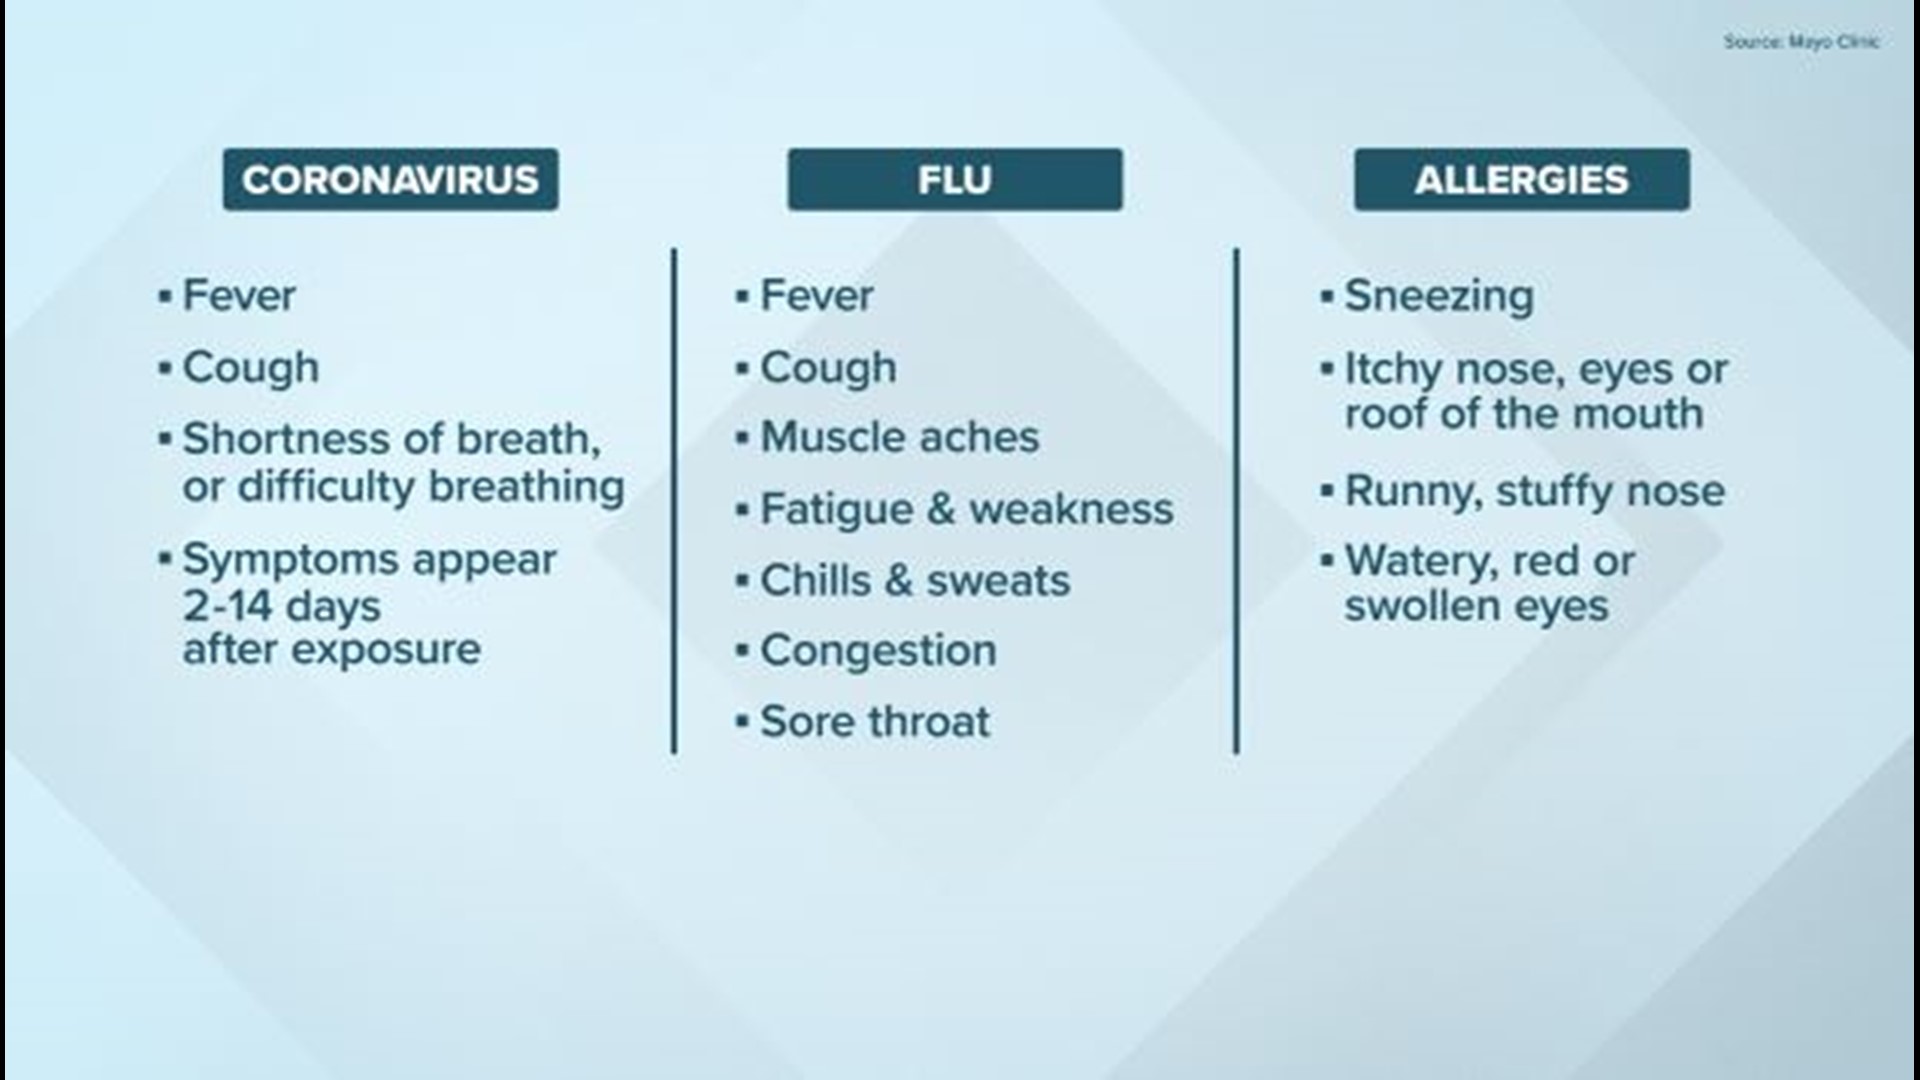 Symptoms of the coronavirus can be similar to the flu and even allergies. Here's what you need to know.